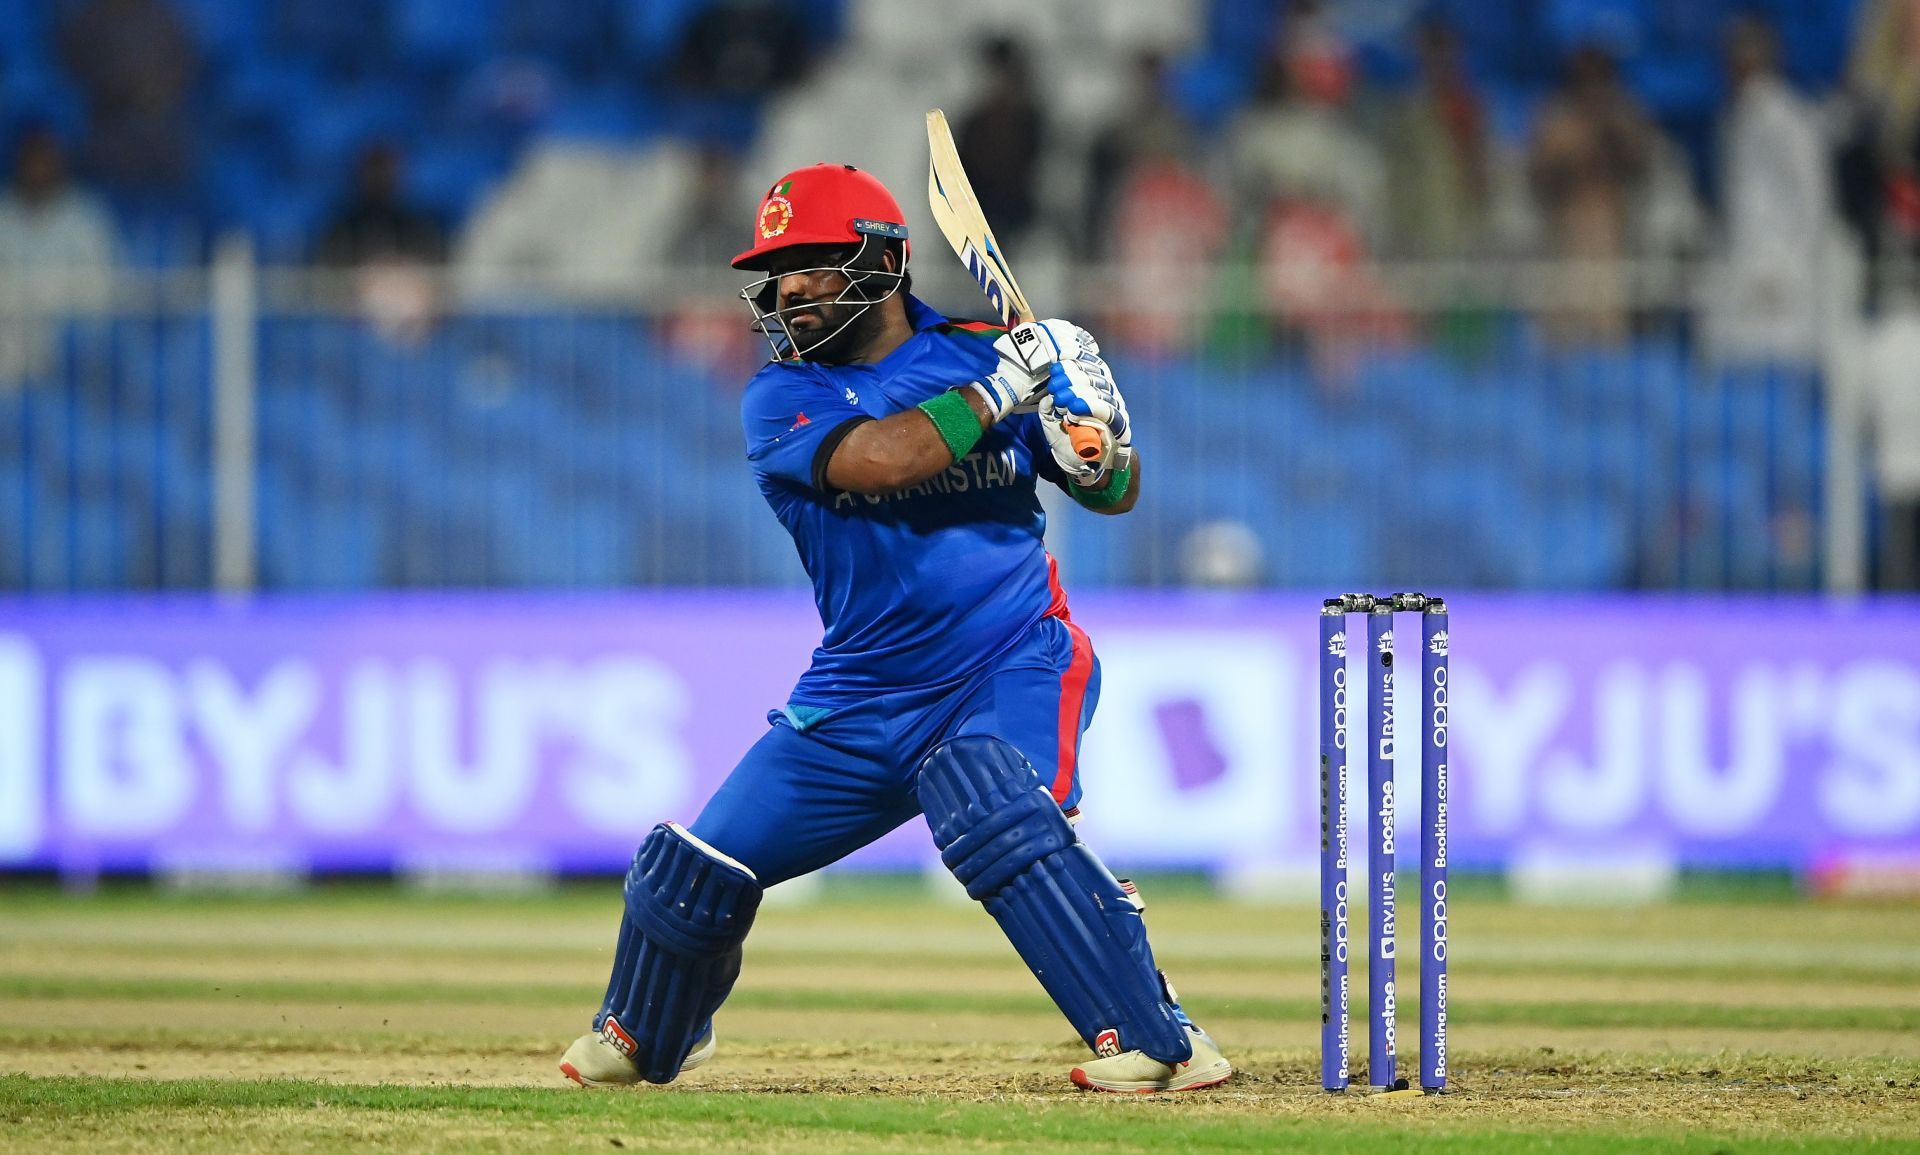 Mohammad Shahzad will look to prove himself after being dropped by the Chennai Braves earlier.